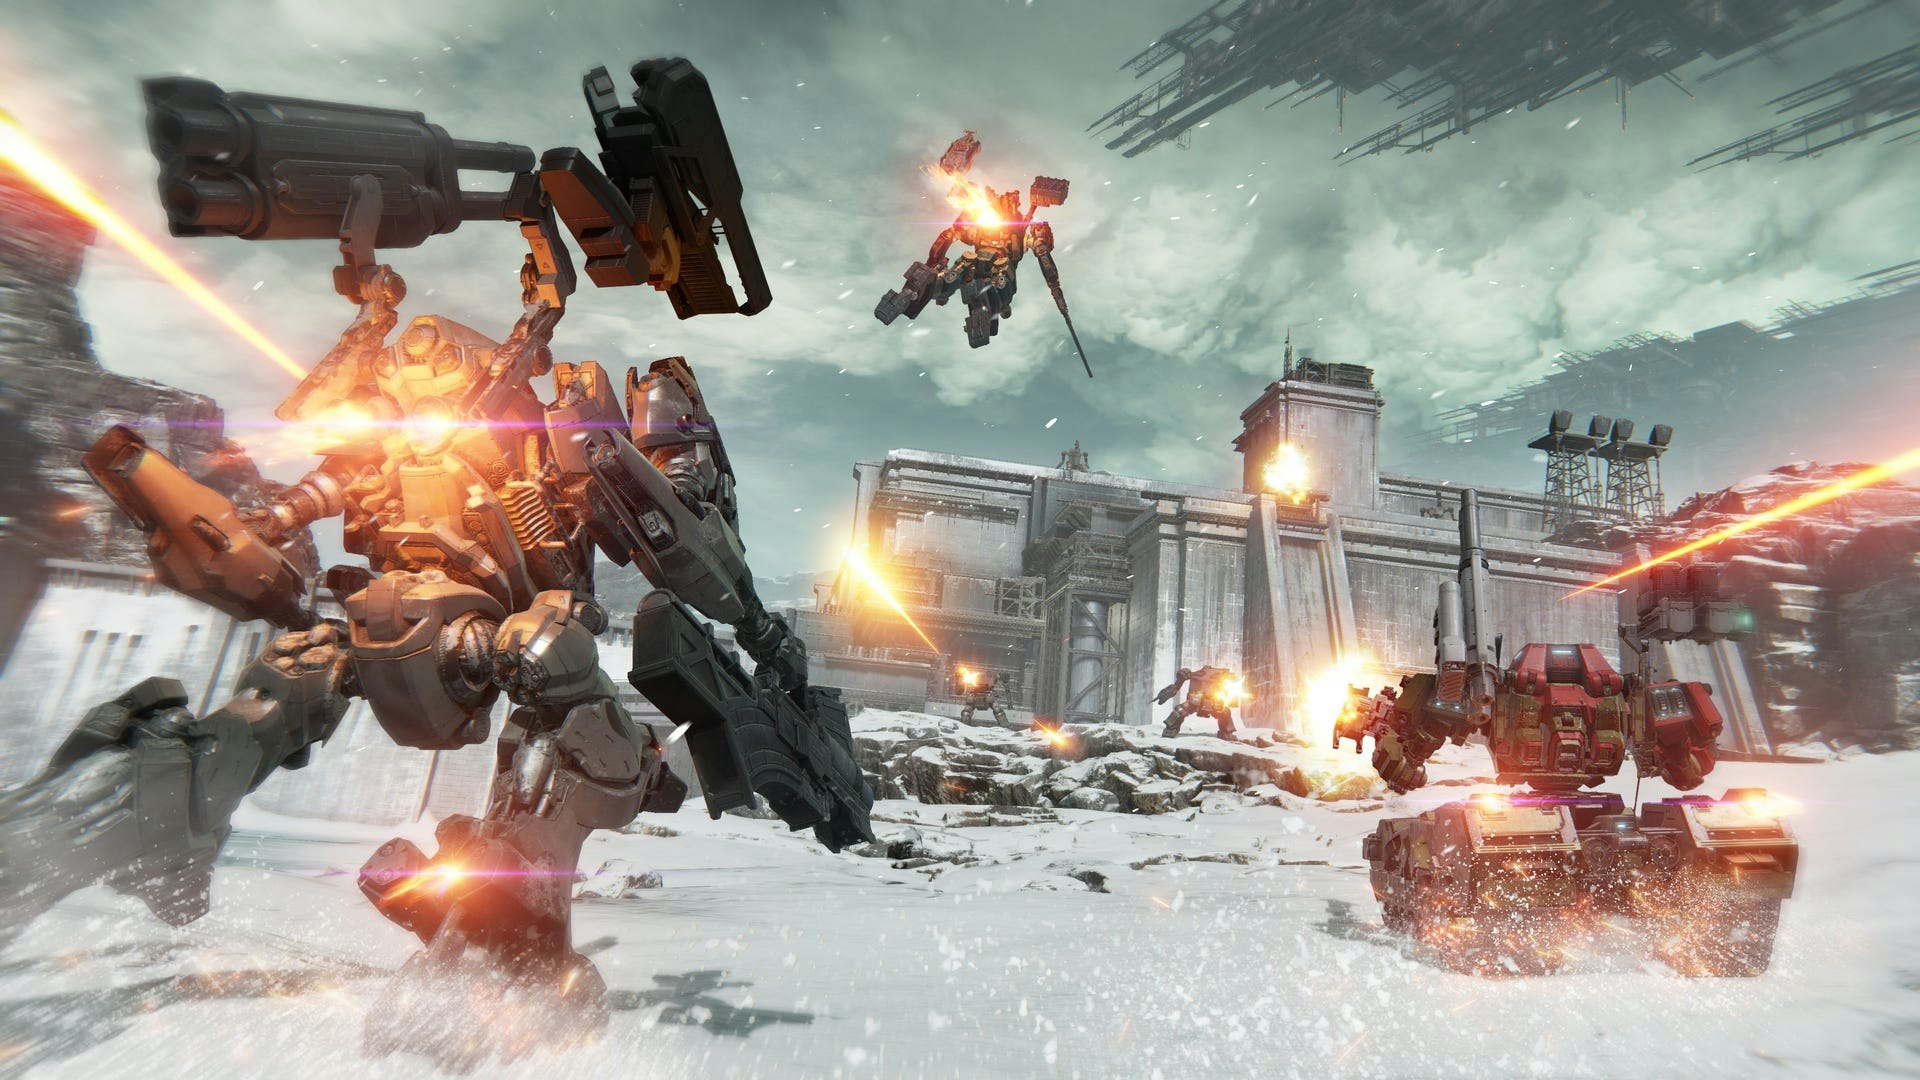 Armored Core 6: Fires of Rubicon's all-new story trailer is here